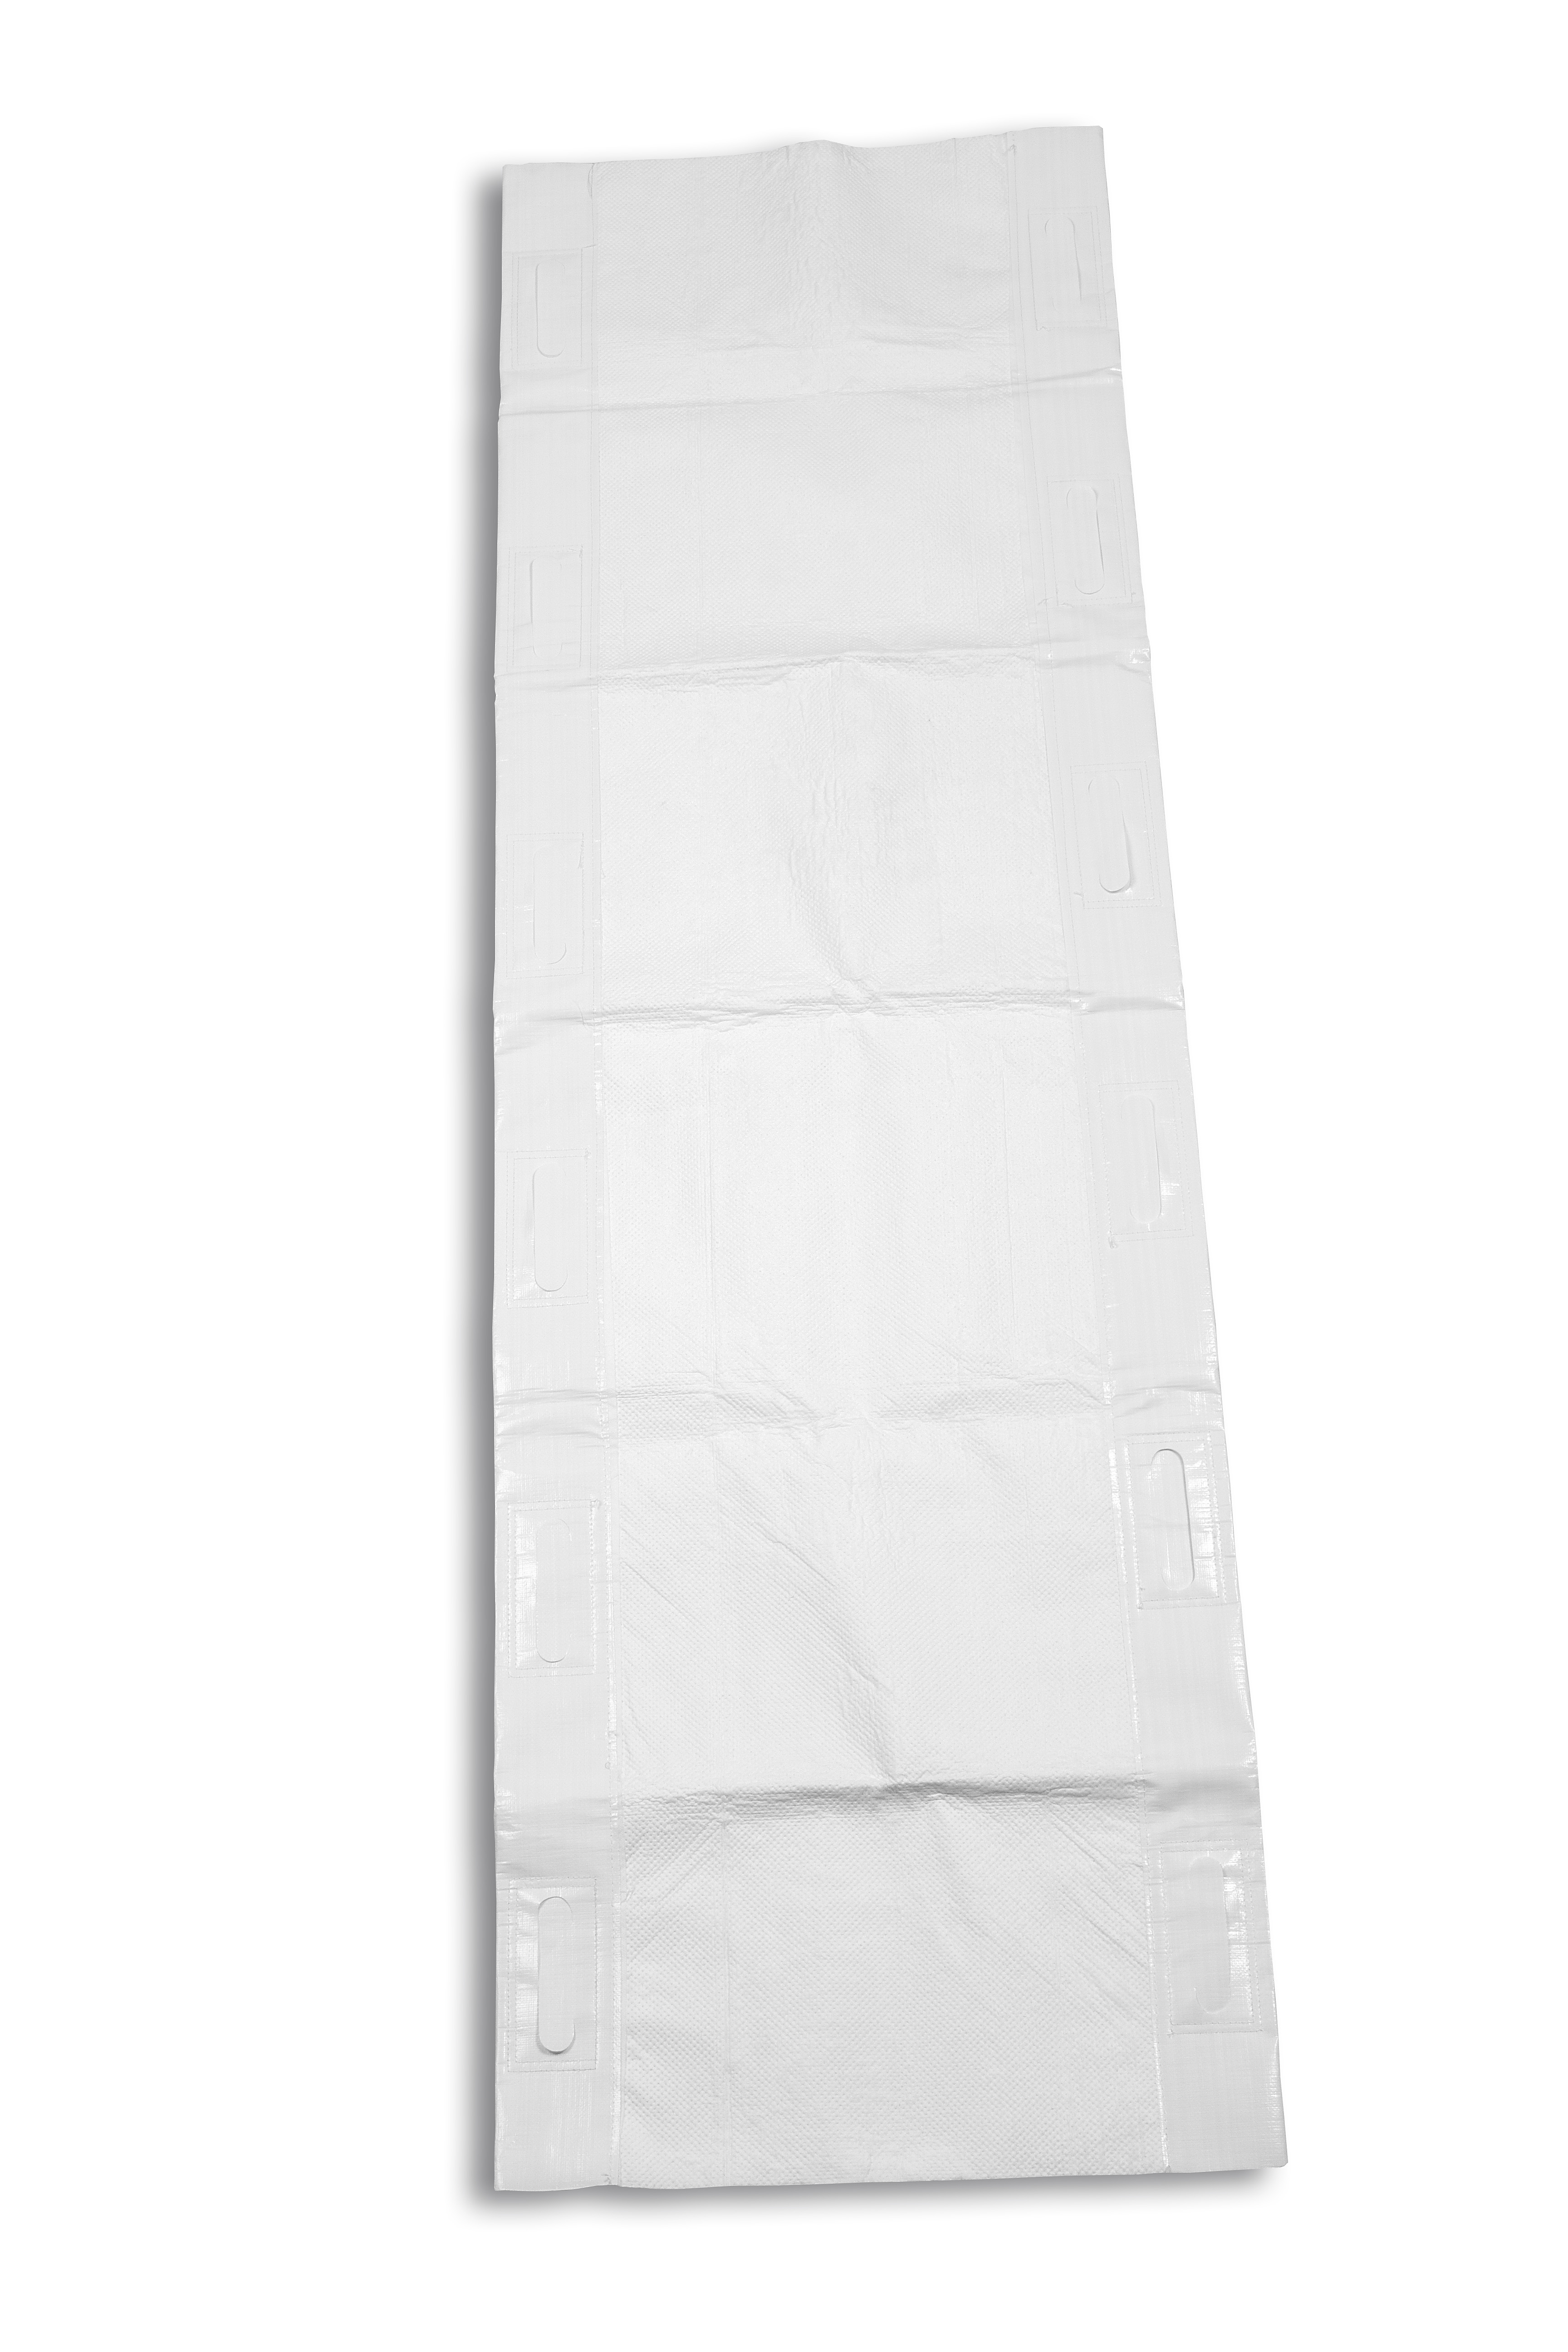 The Rescue Trade disposable rescue cloth has a tear-resistant carrying surface and is made of sturdy polyethylene fabric. The load-bearing capacity, based on DIN EN 1865-1, allows you to: 
rescuing and rescuing lying patients up to 150kg. Despite the high absorbency, 
It is lightweight and comfortable. With 12 stamped-in carrying handles.